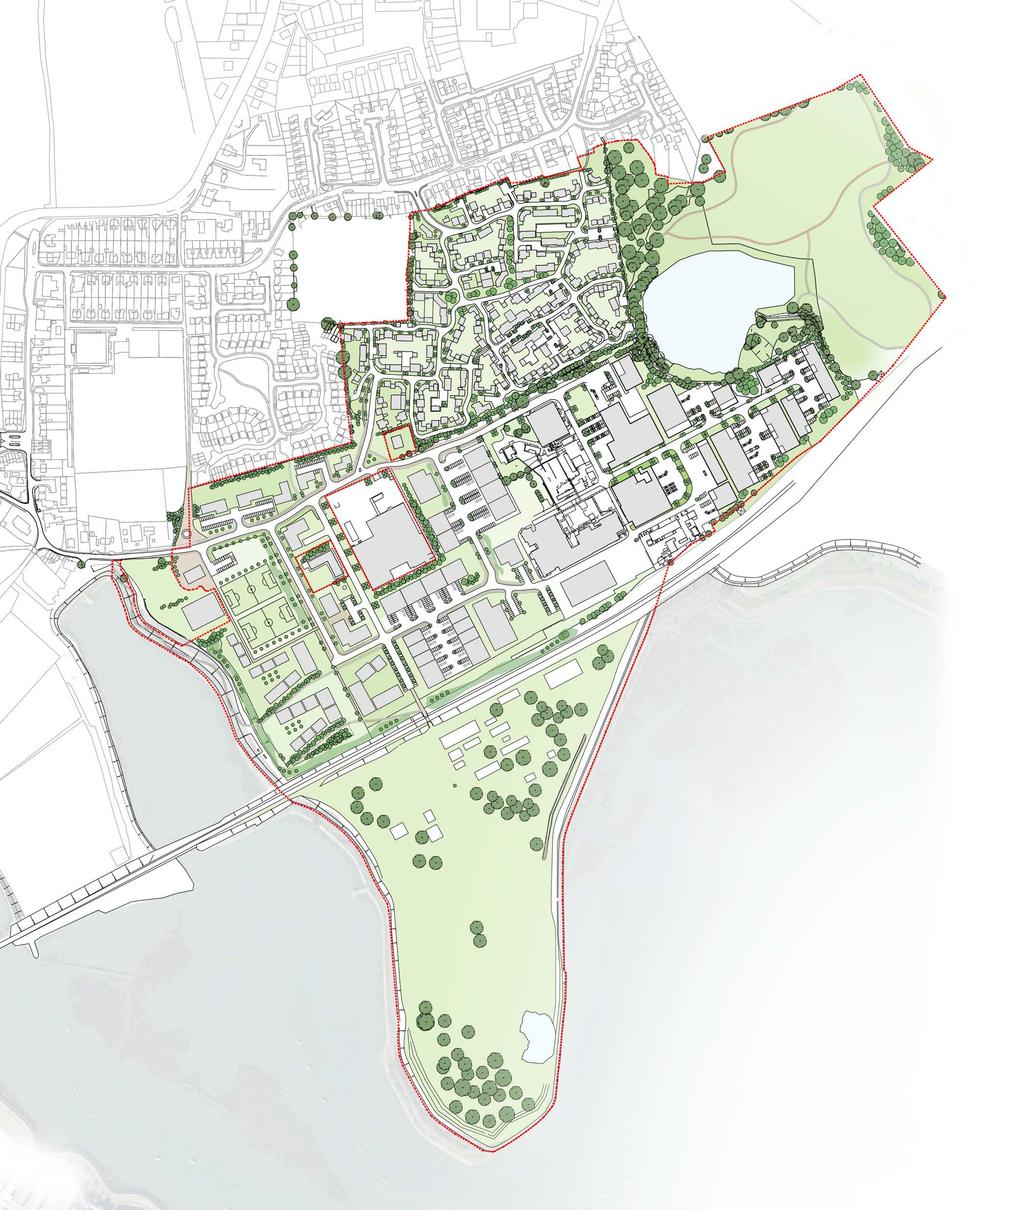 7.0 THE INDICATIVE MASTERPLAN Potential footpath link Extension of existing playground New and improved footpaths Potential for small scale Retail / Doctors / Dentist etc